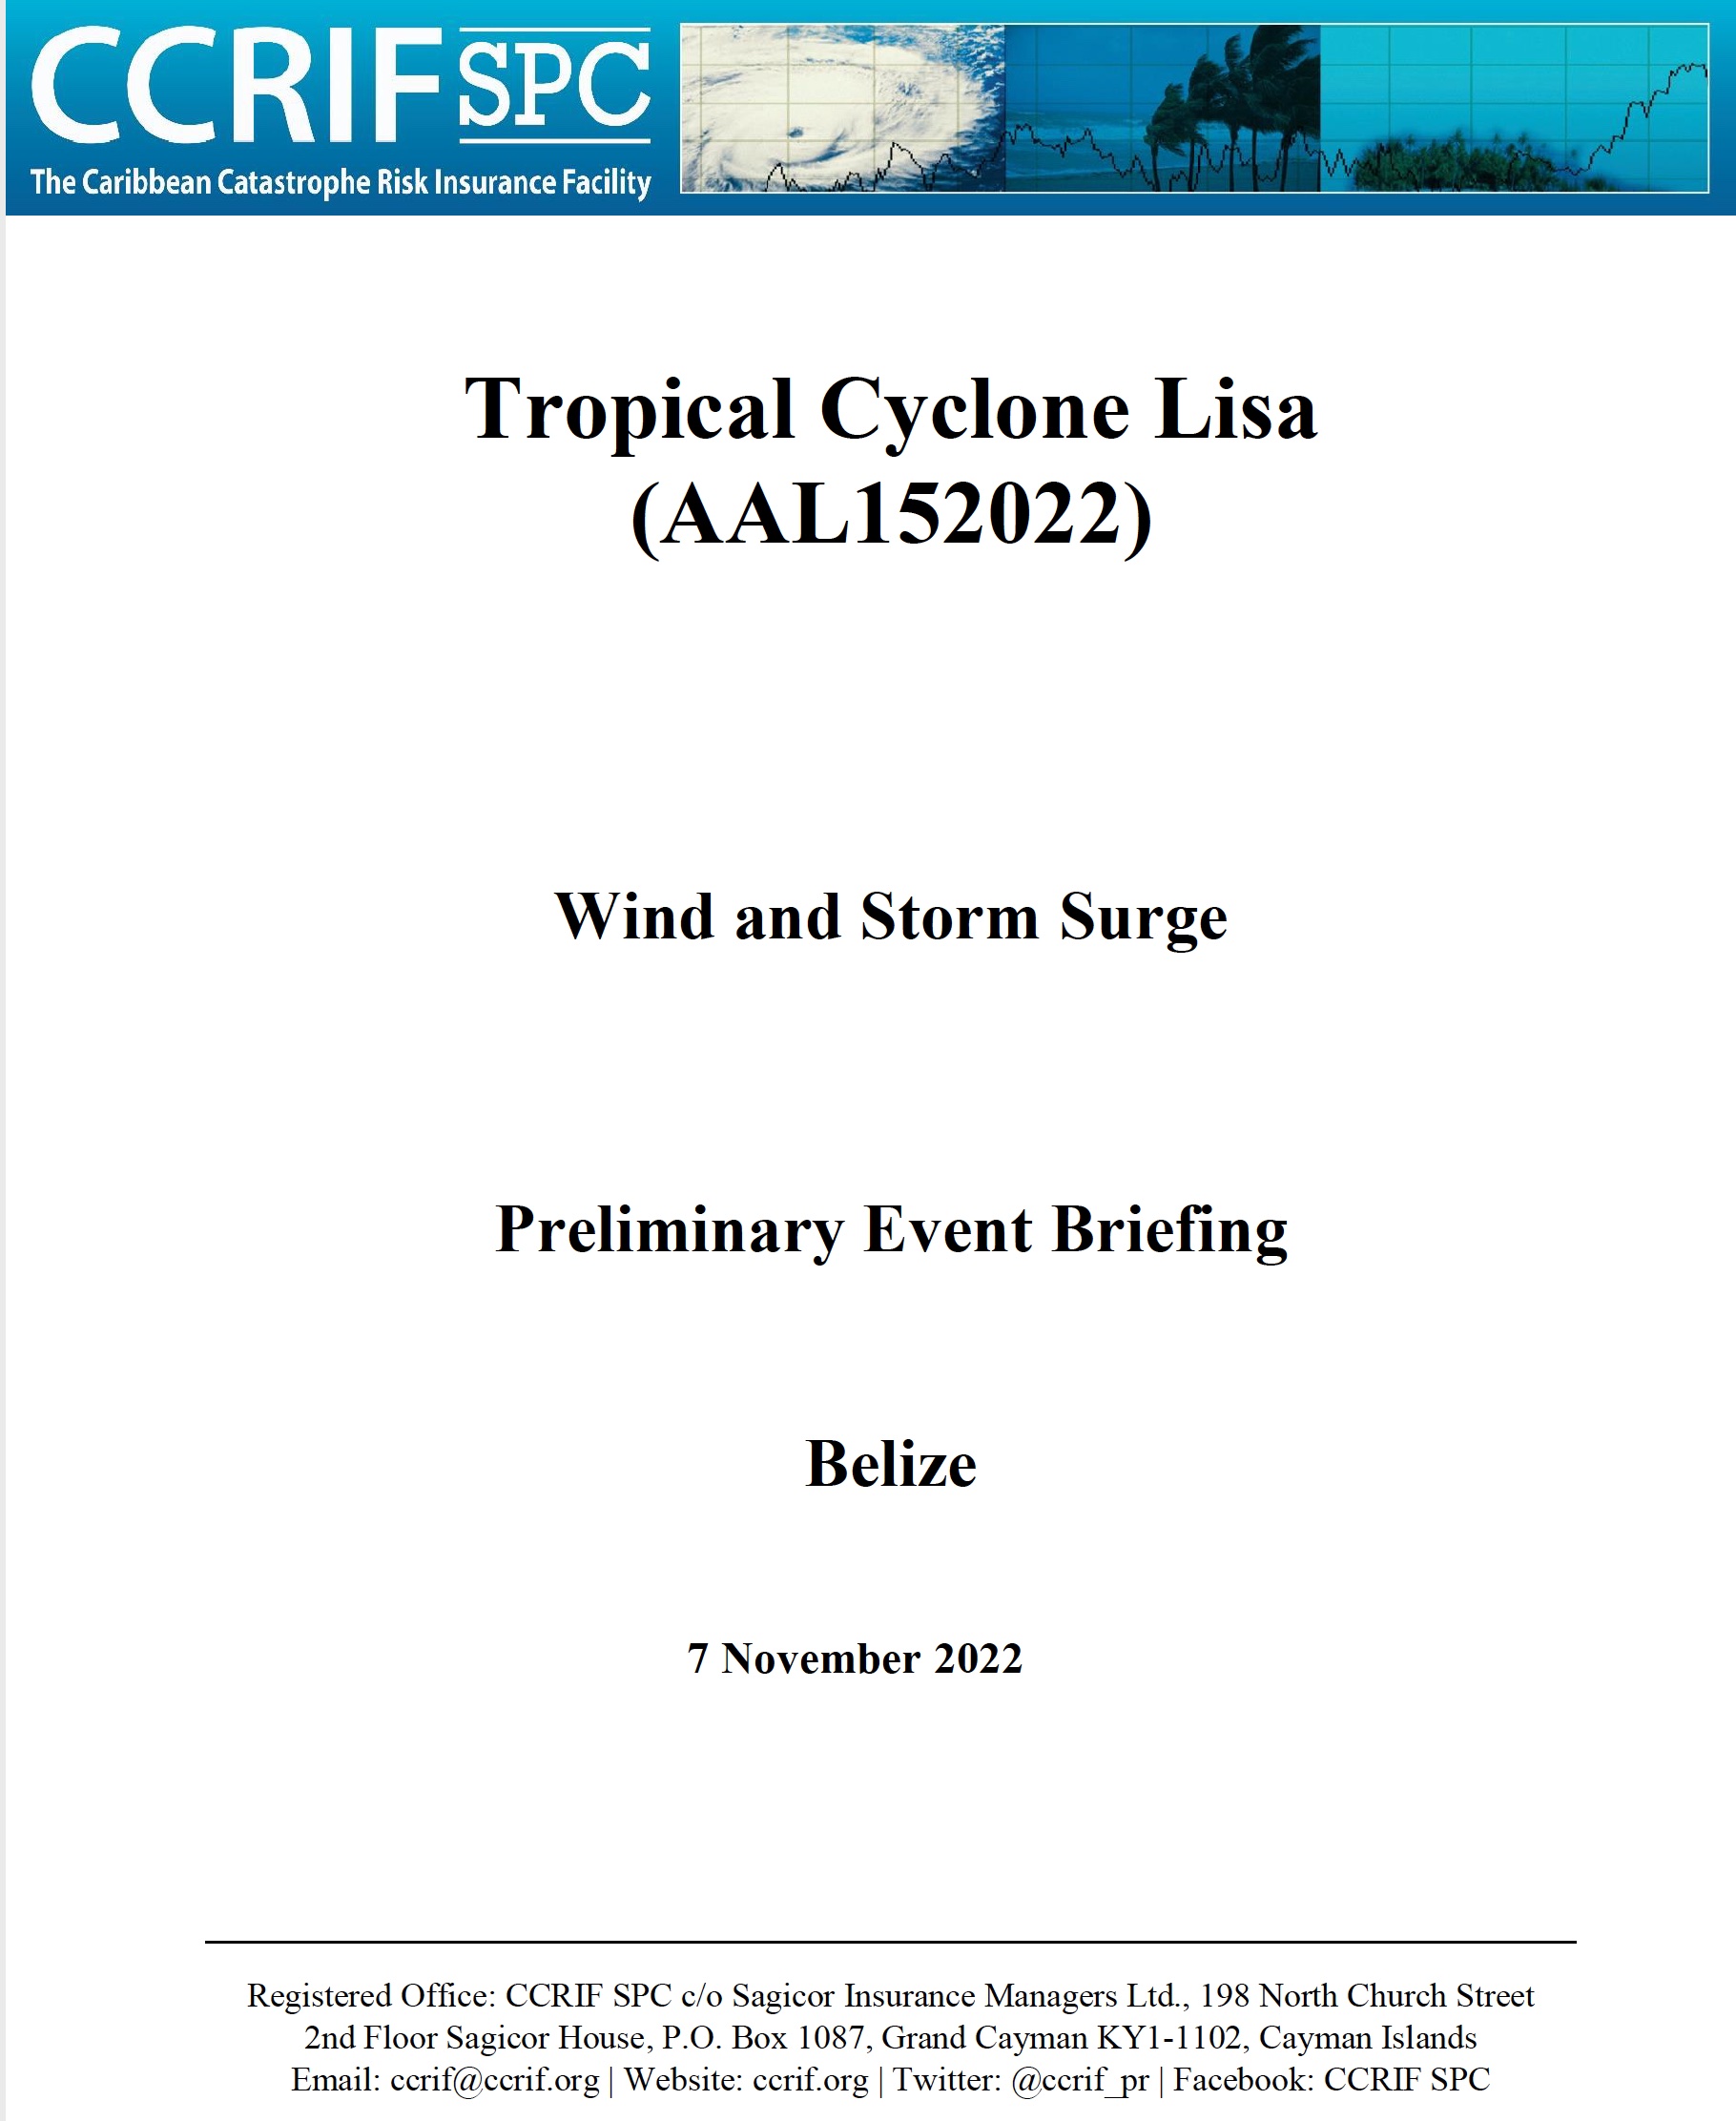 Preliminary Event Briefing - Wind and Storm Surge - TC Lisa - Belize - November 7 2022